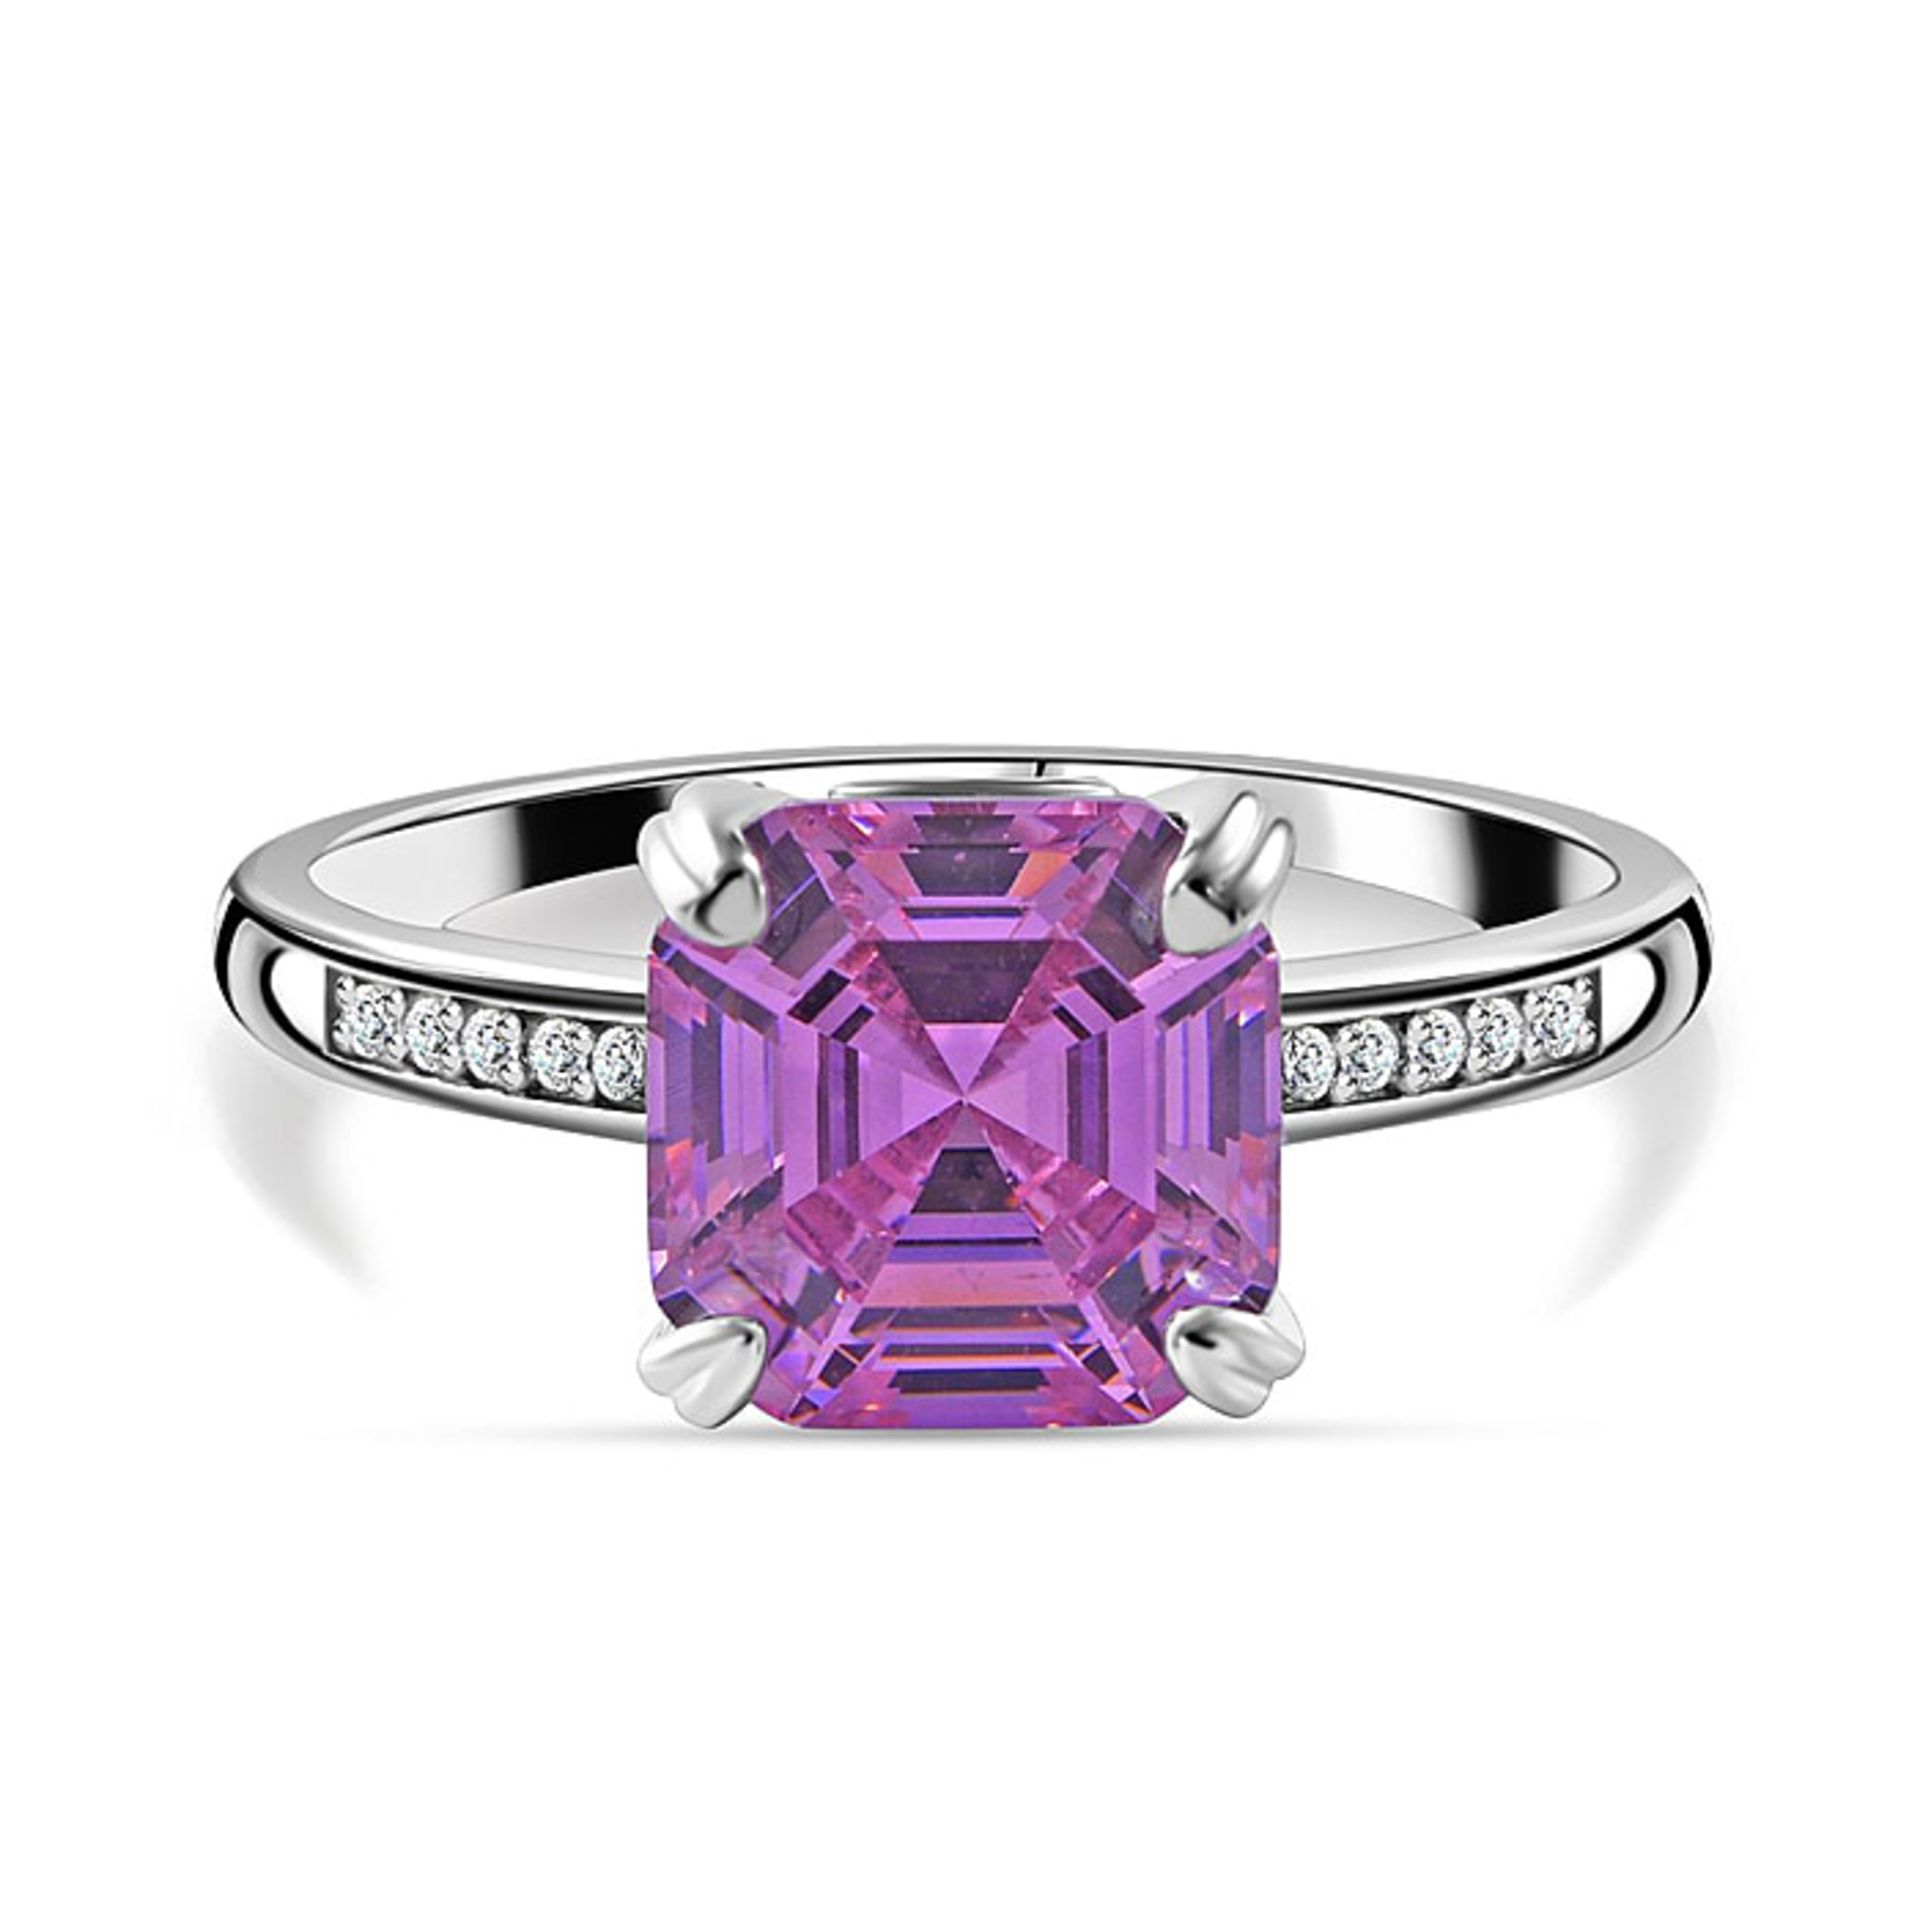 Pink & White Cubic Zirconia Ring In Rhodium Overlay Sterling Silver - Image 3 of 5